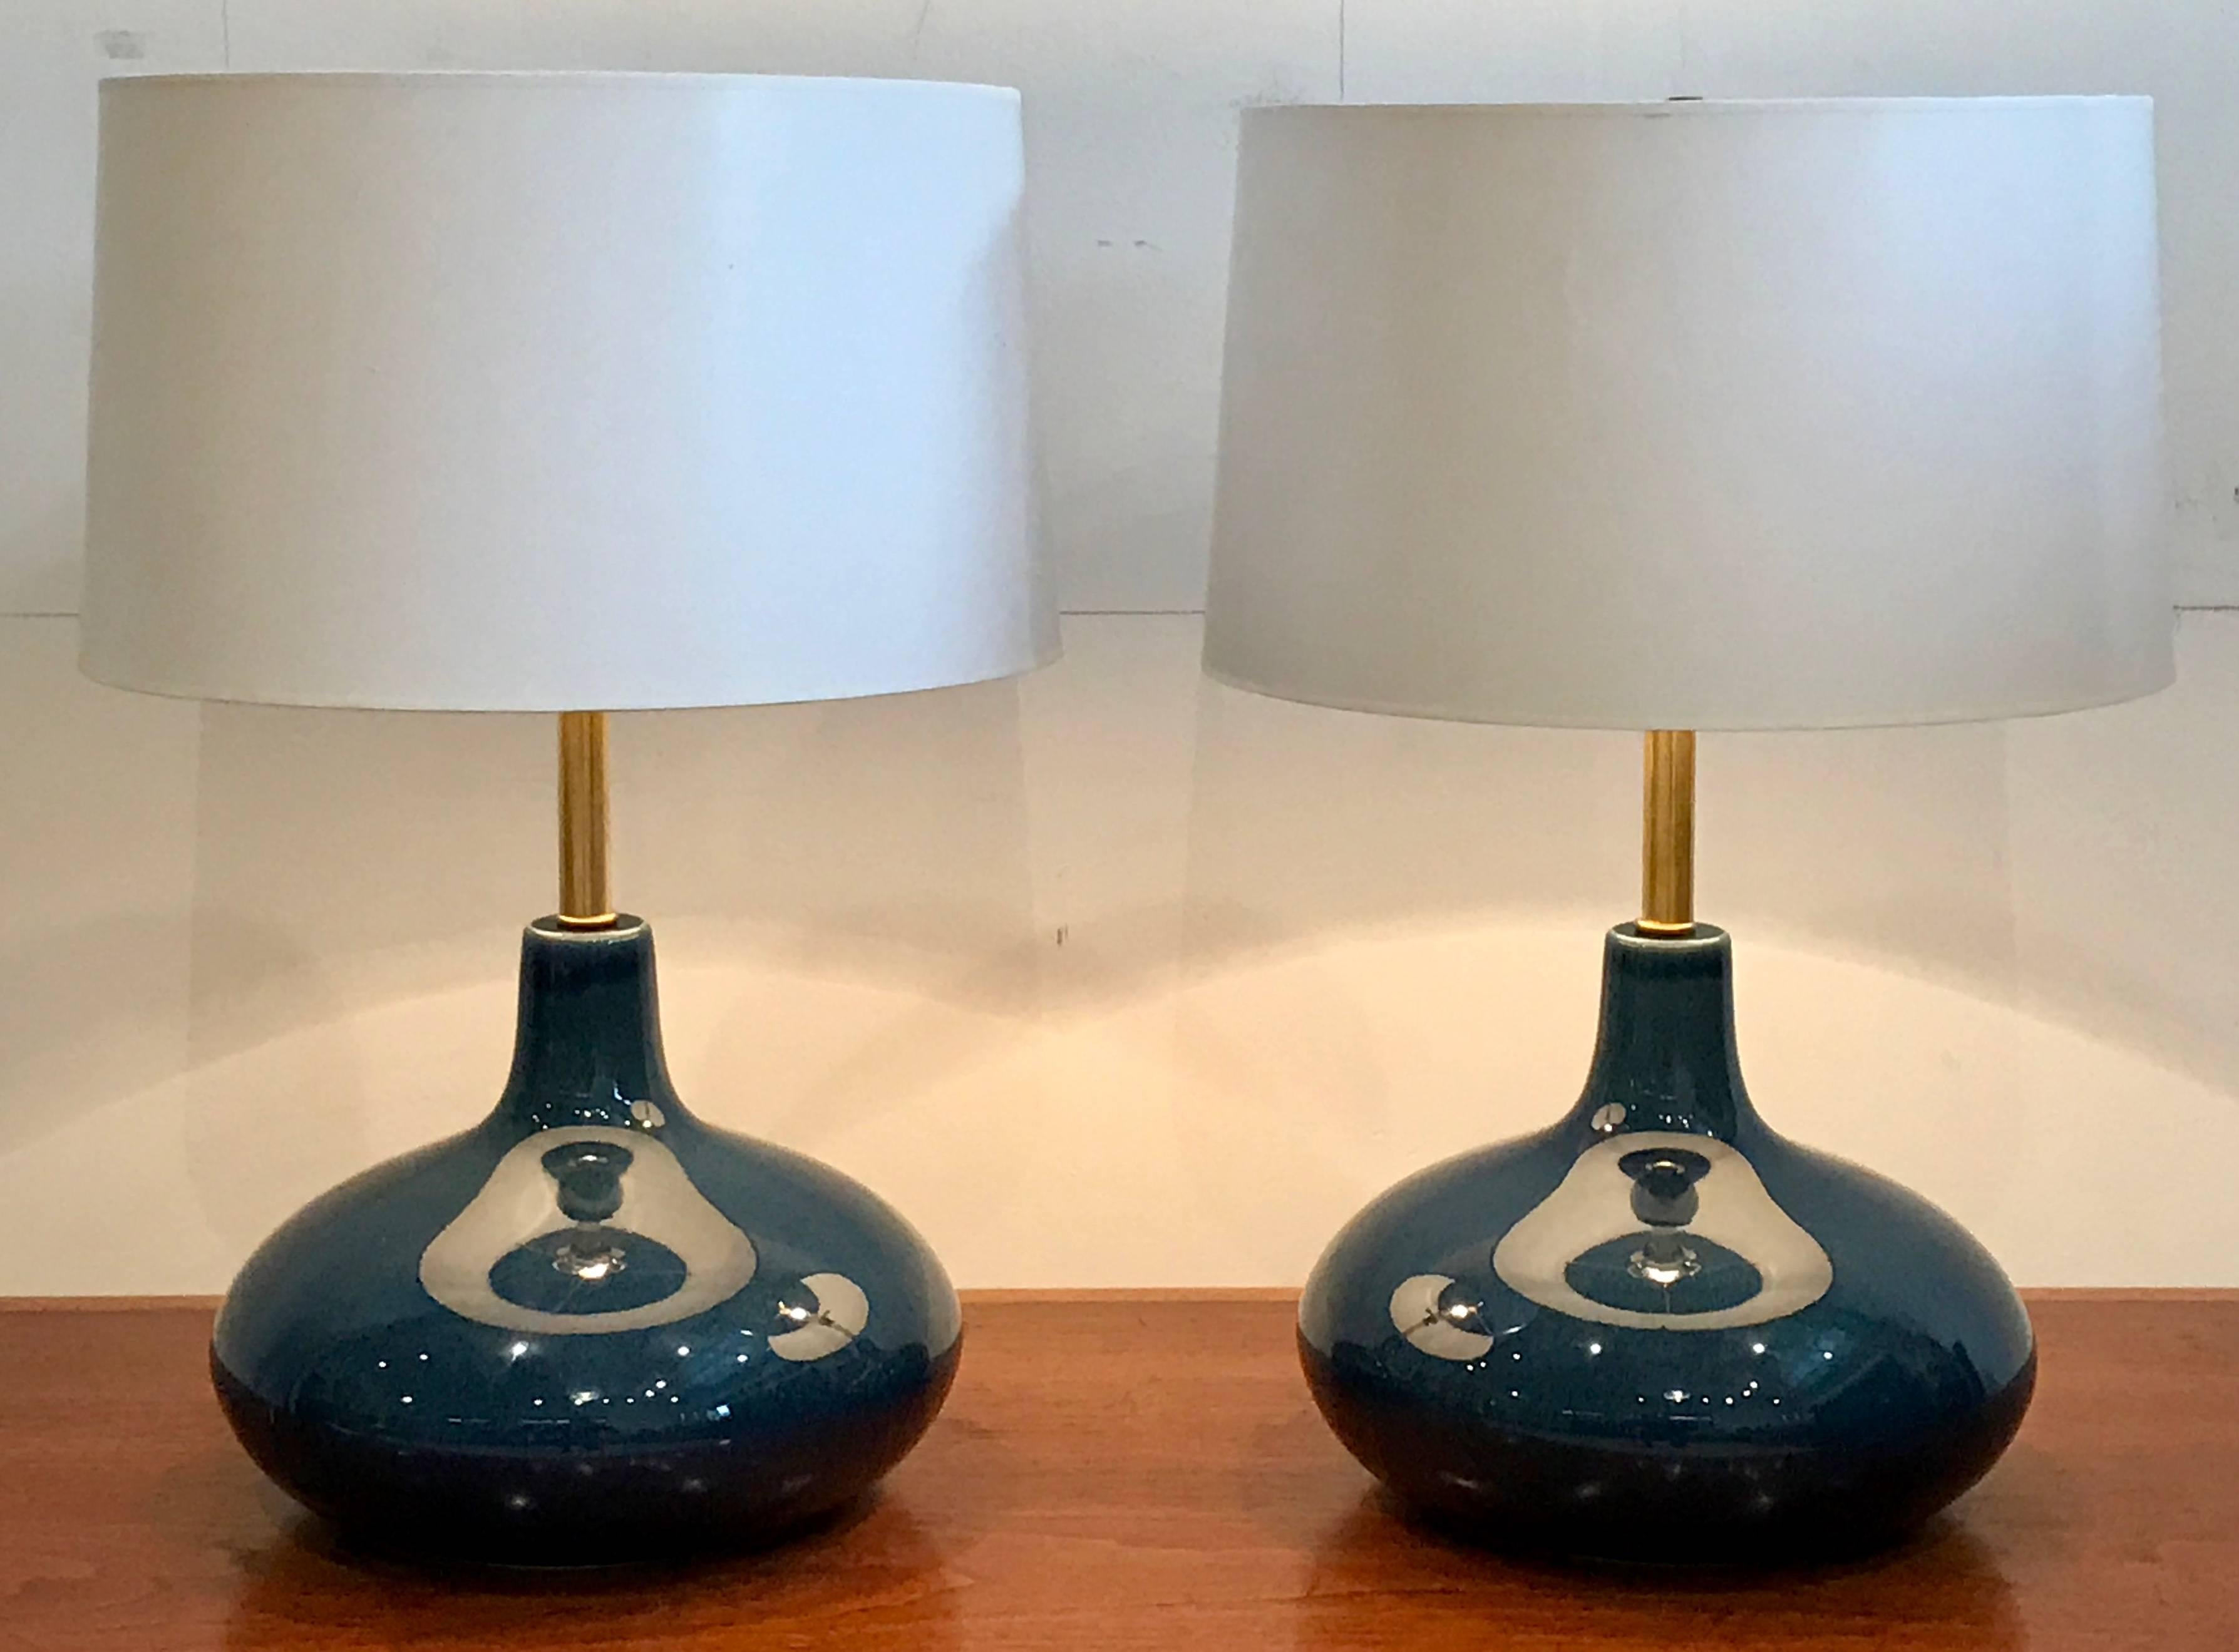 Gorgeous low profile cobalt blue glazed Mid-Century Modern ceramic table lamps by Bostlund Industries.  Exquisite! See photos.  Shades not included.